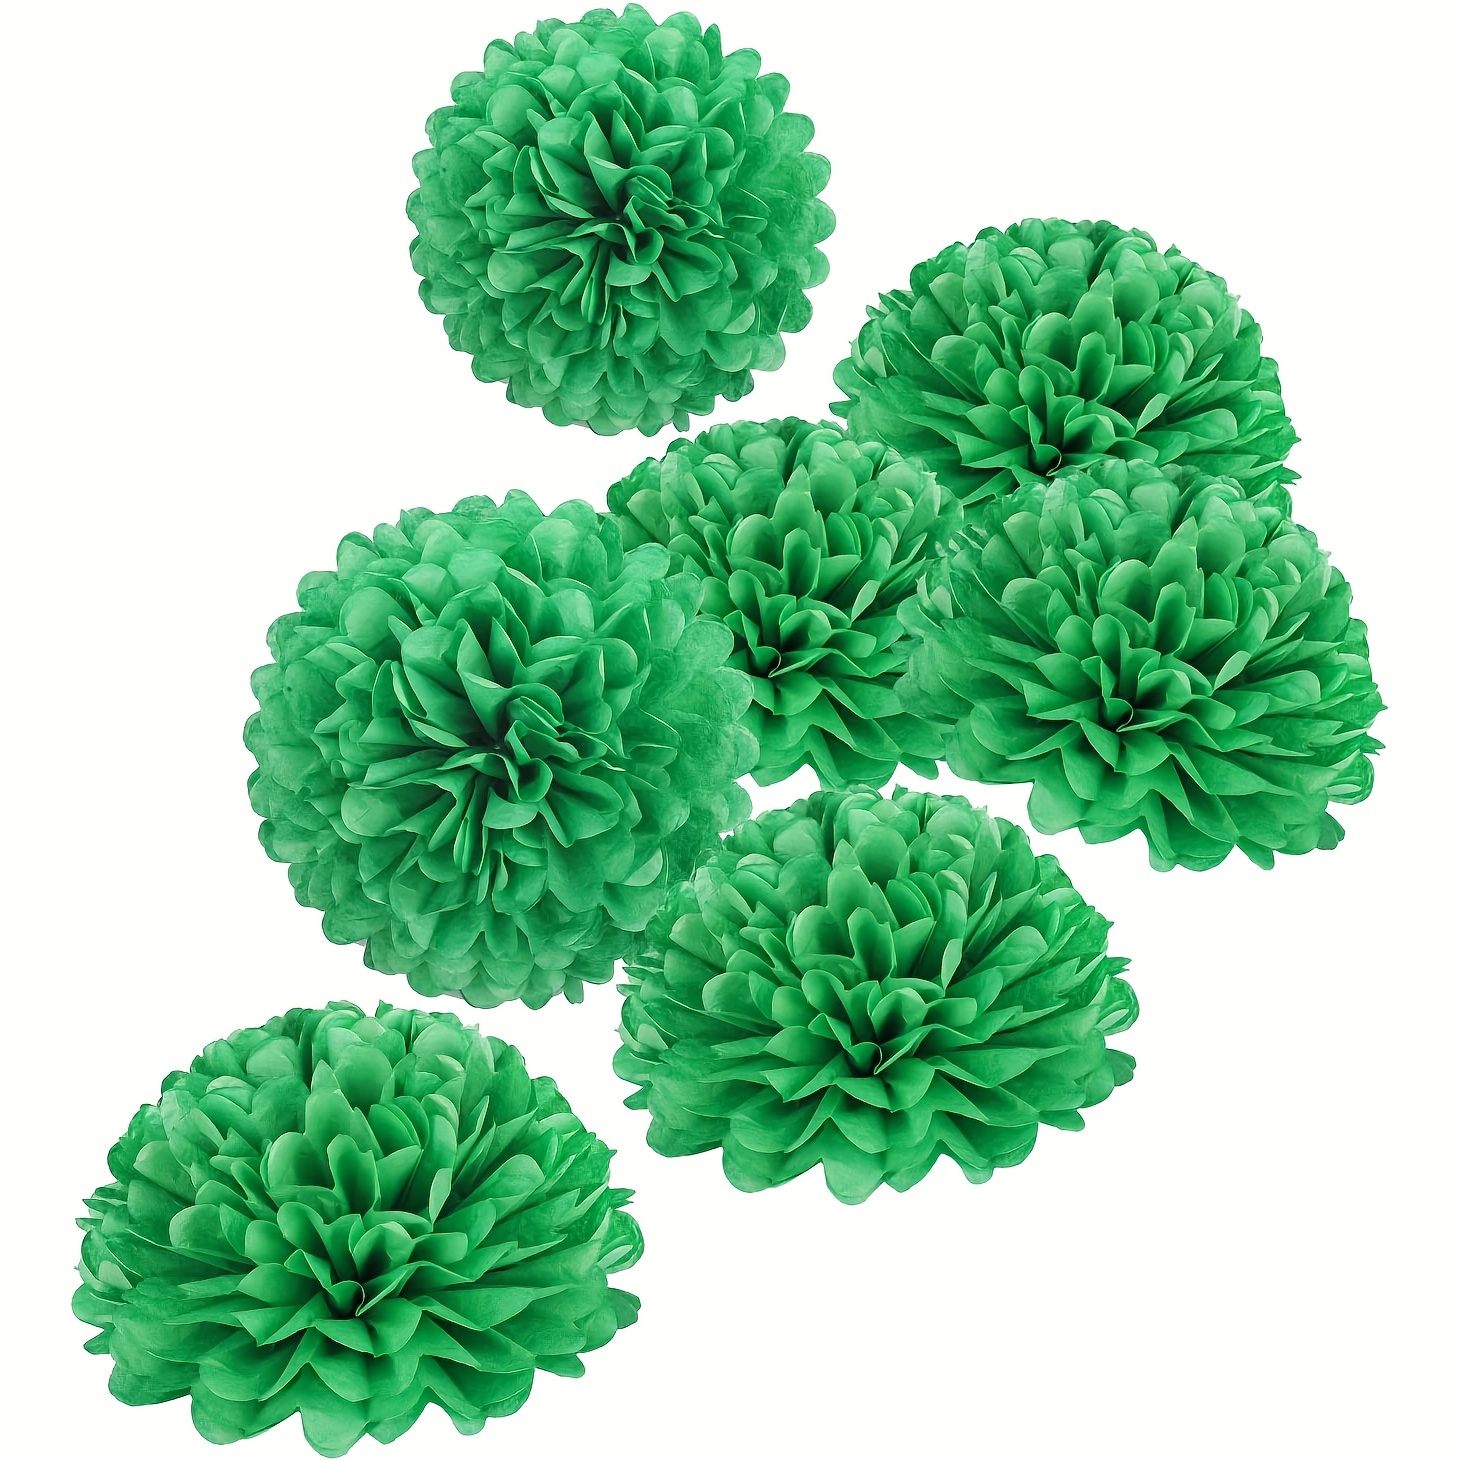 Room Decor on a Budget: Easy Tissue Pom Poms - One Hundred Dollars a Month